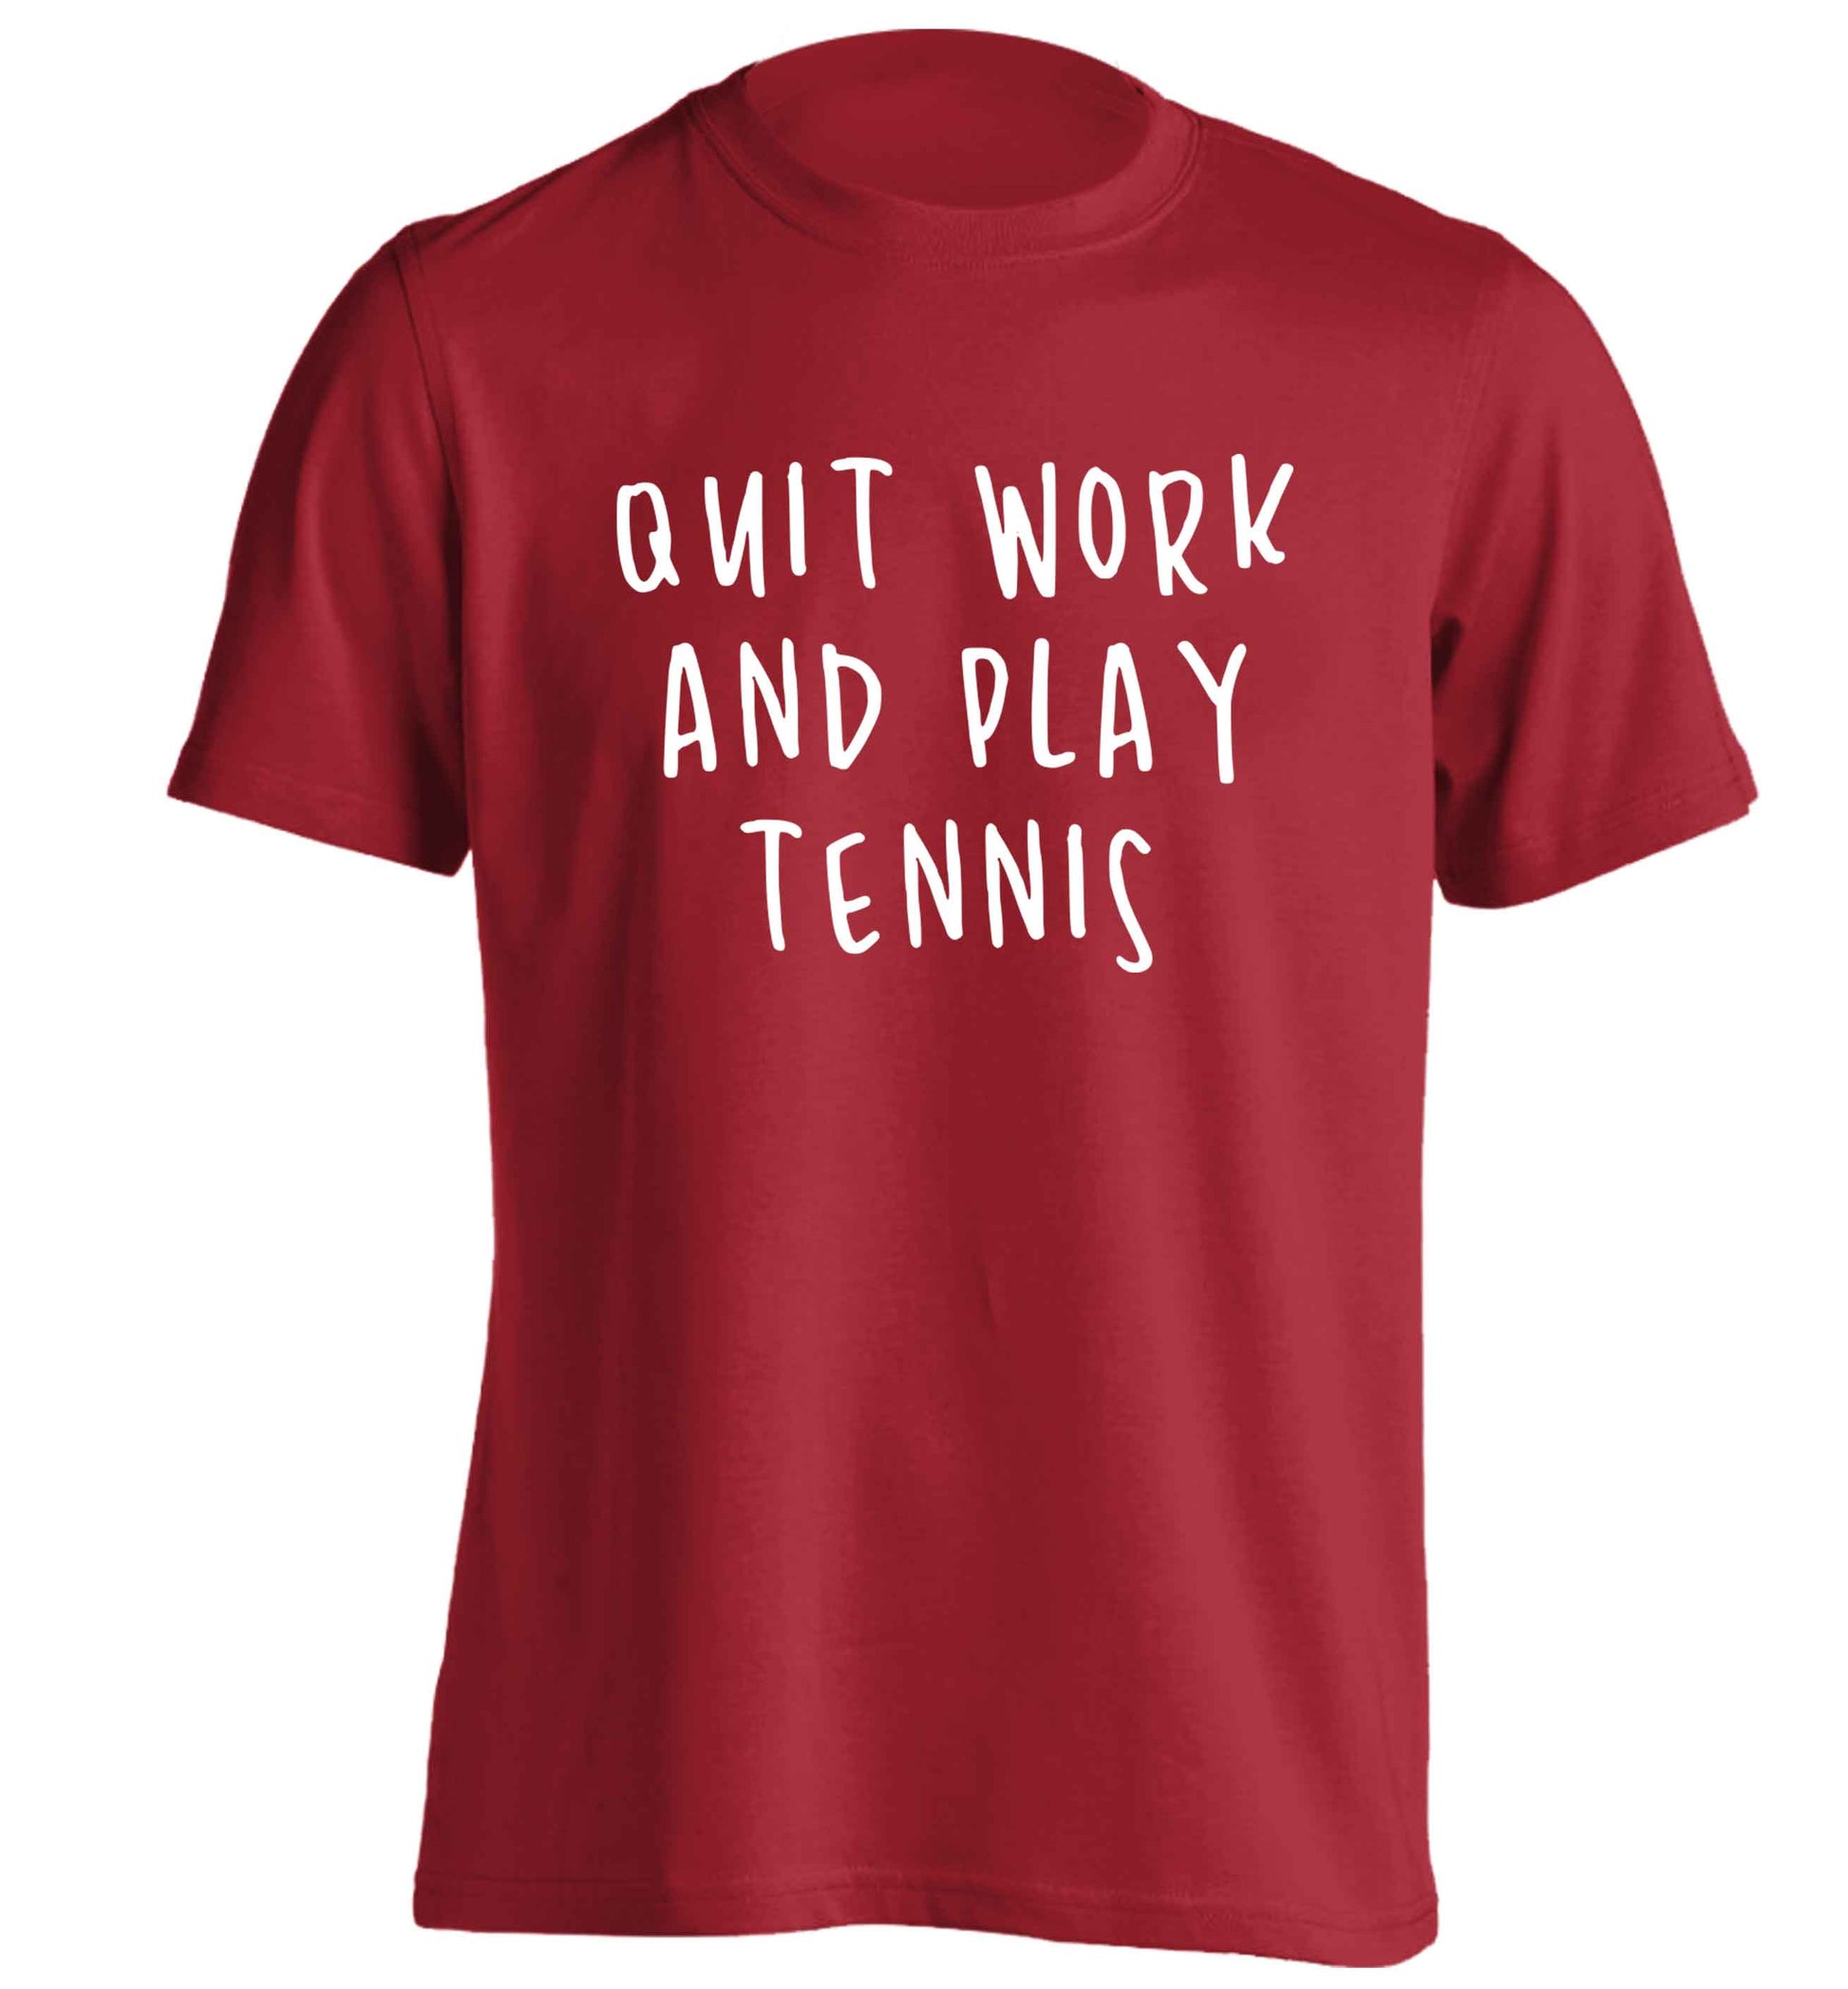 Quit work and play tennis adults unisex red Tshirt 2XL